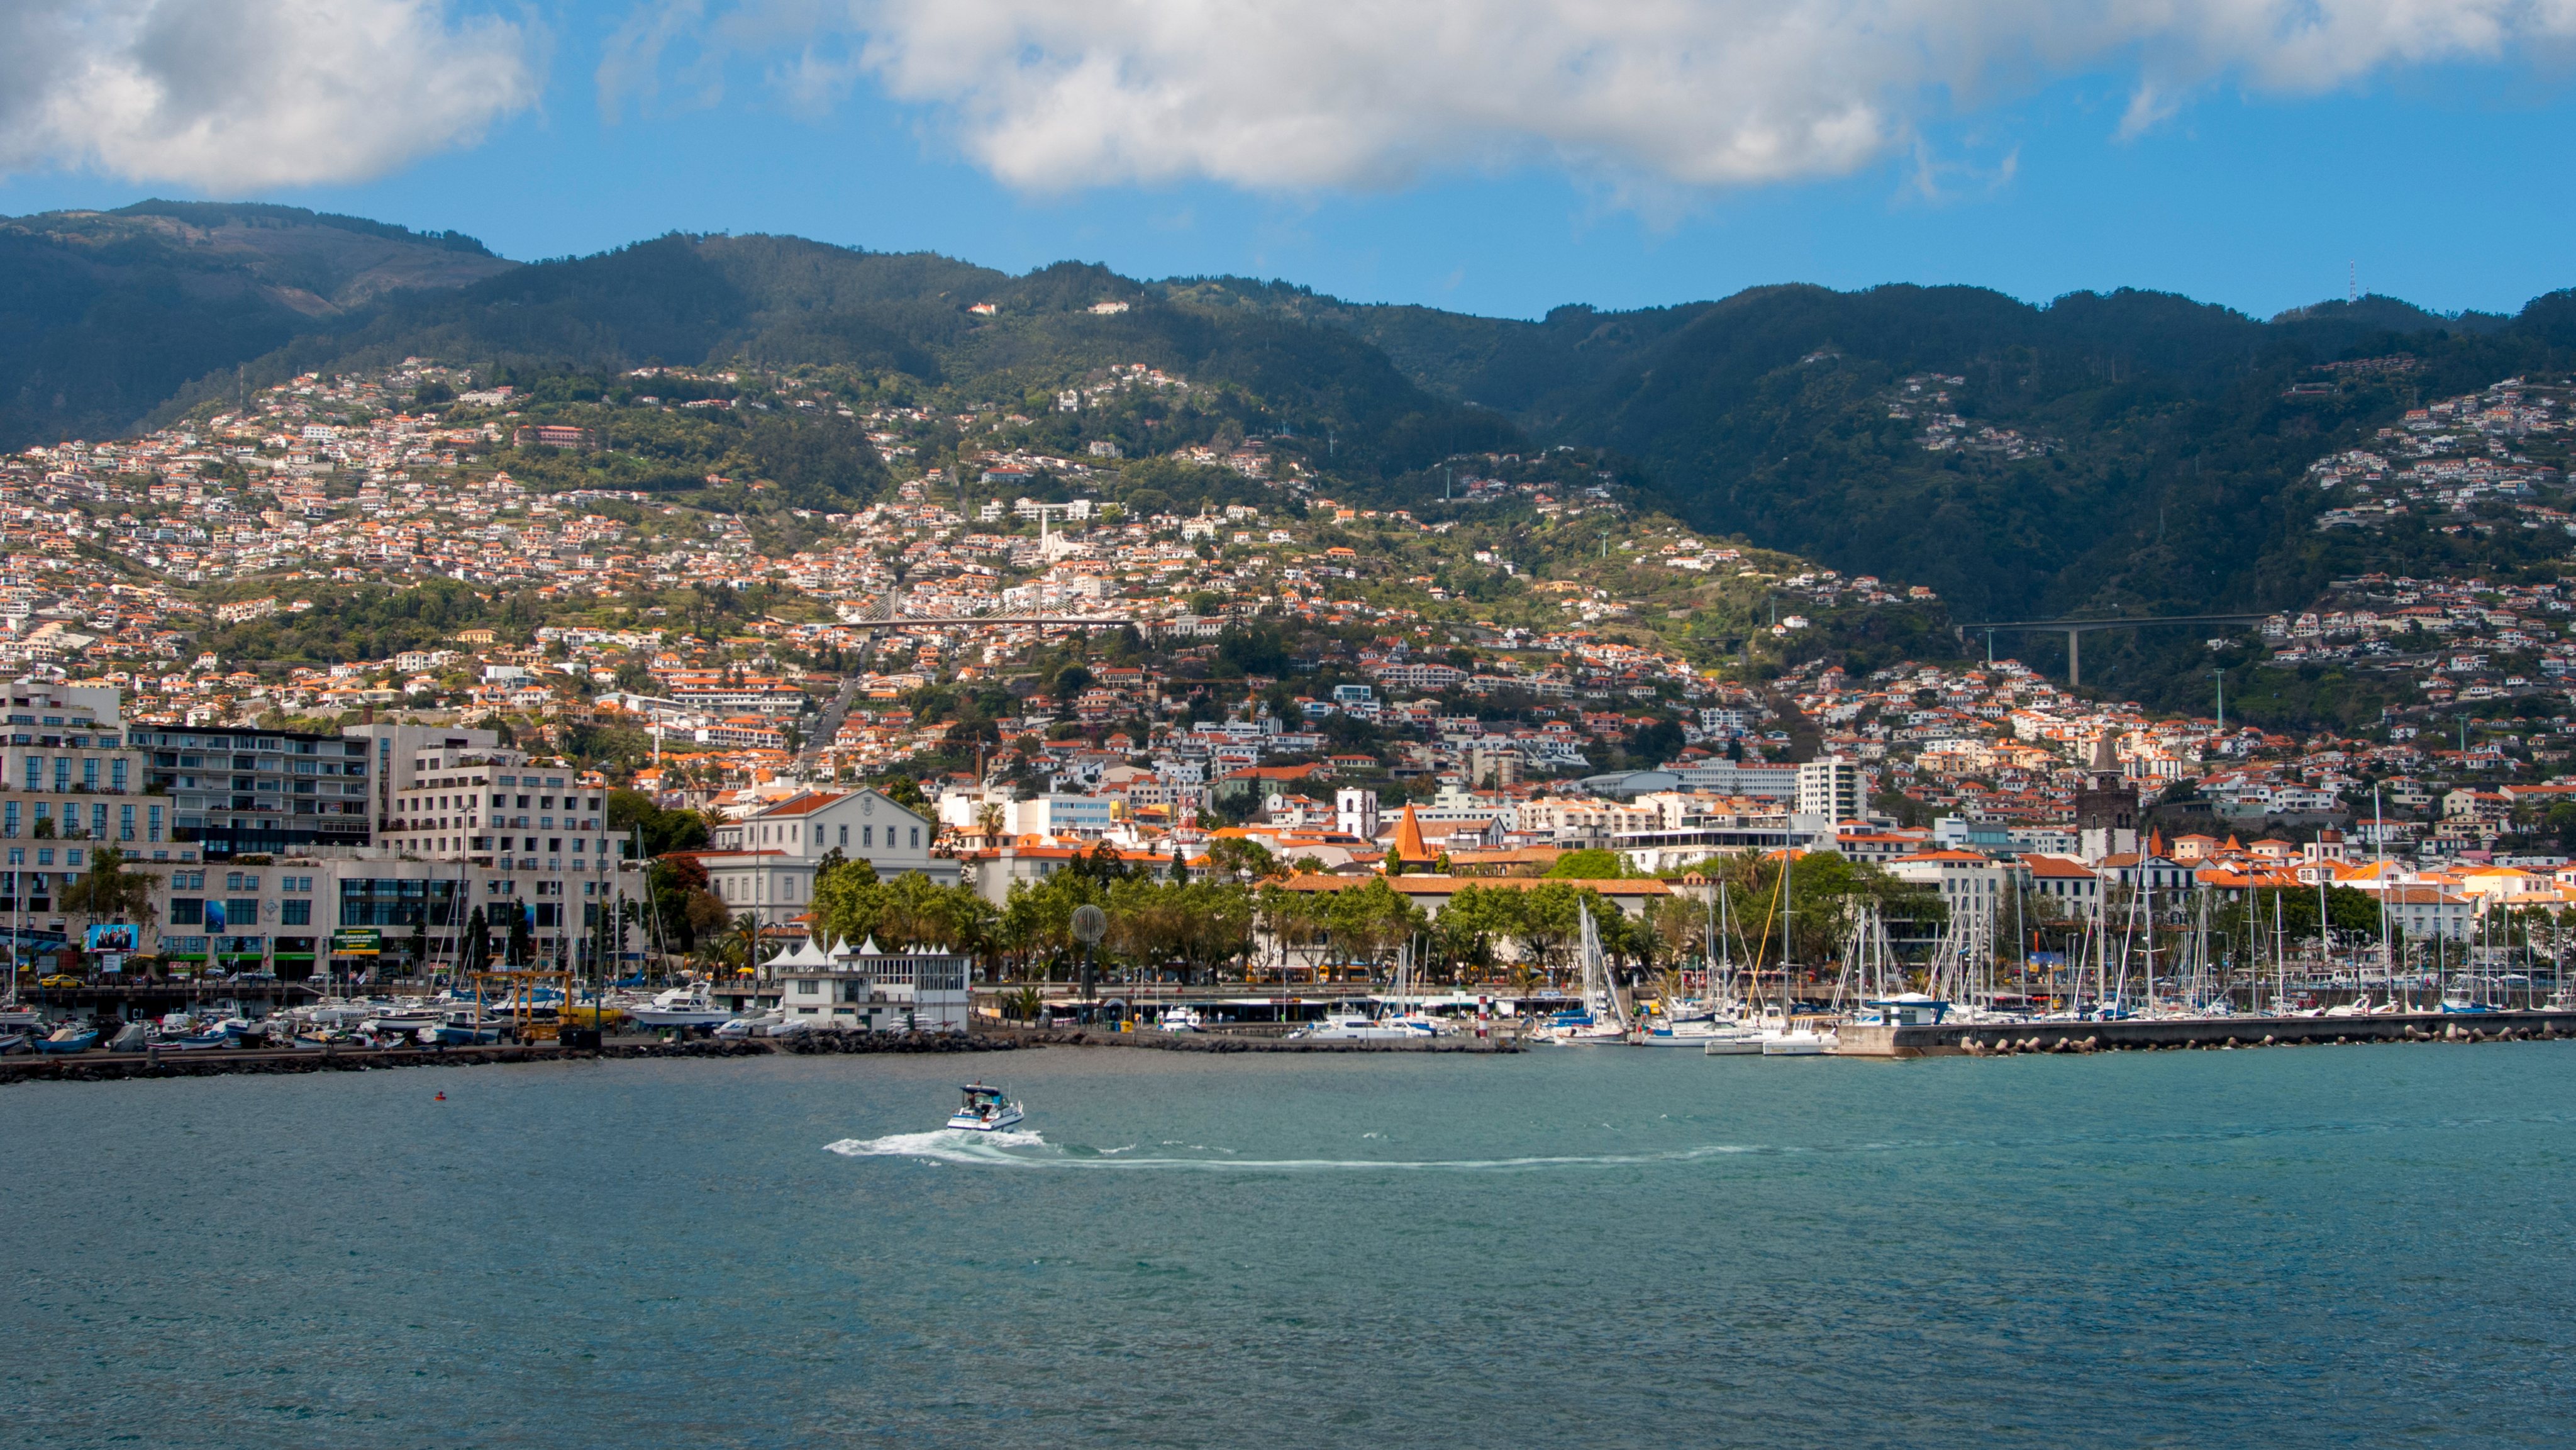 View of the city of Funchal on the Portuguese island of